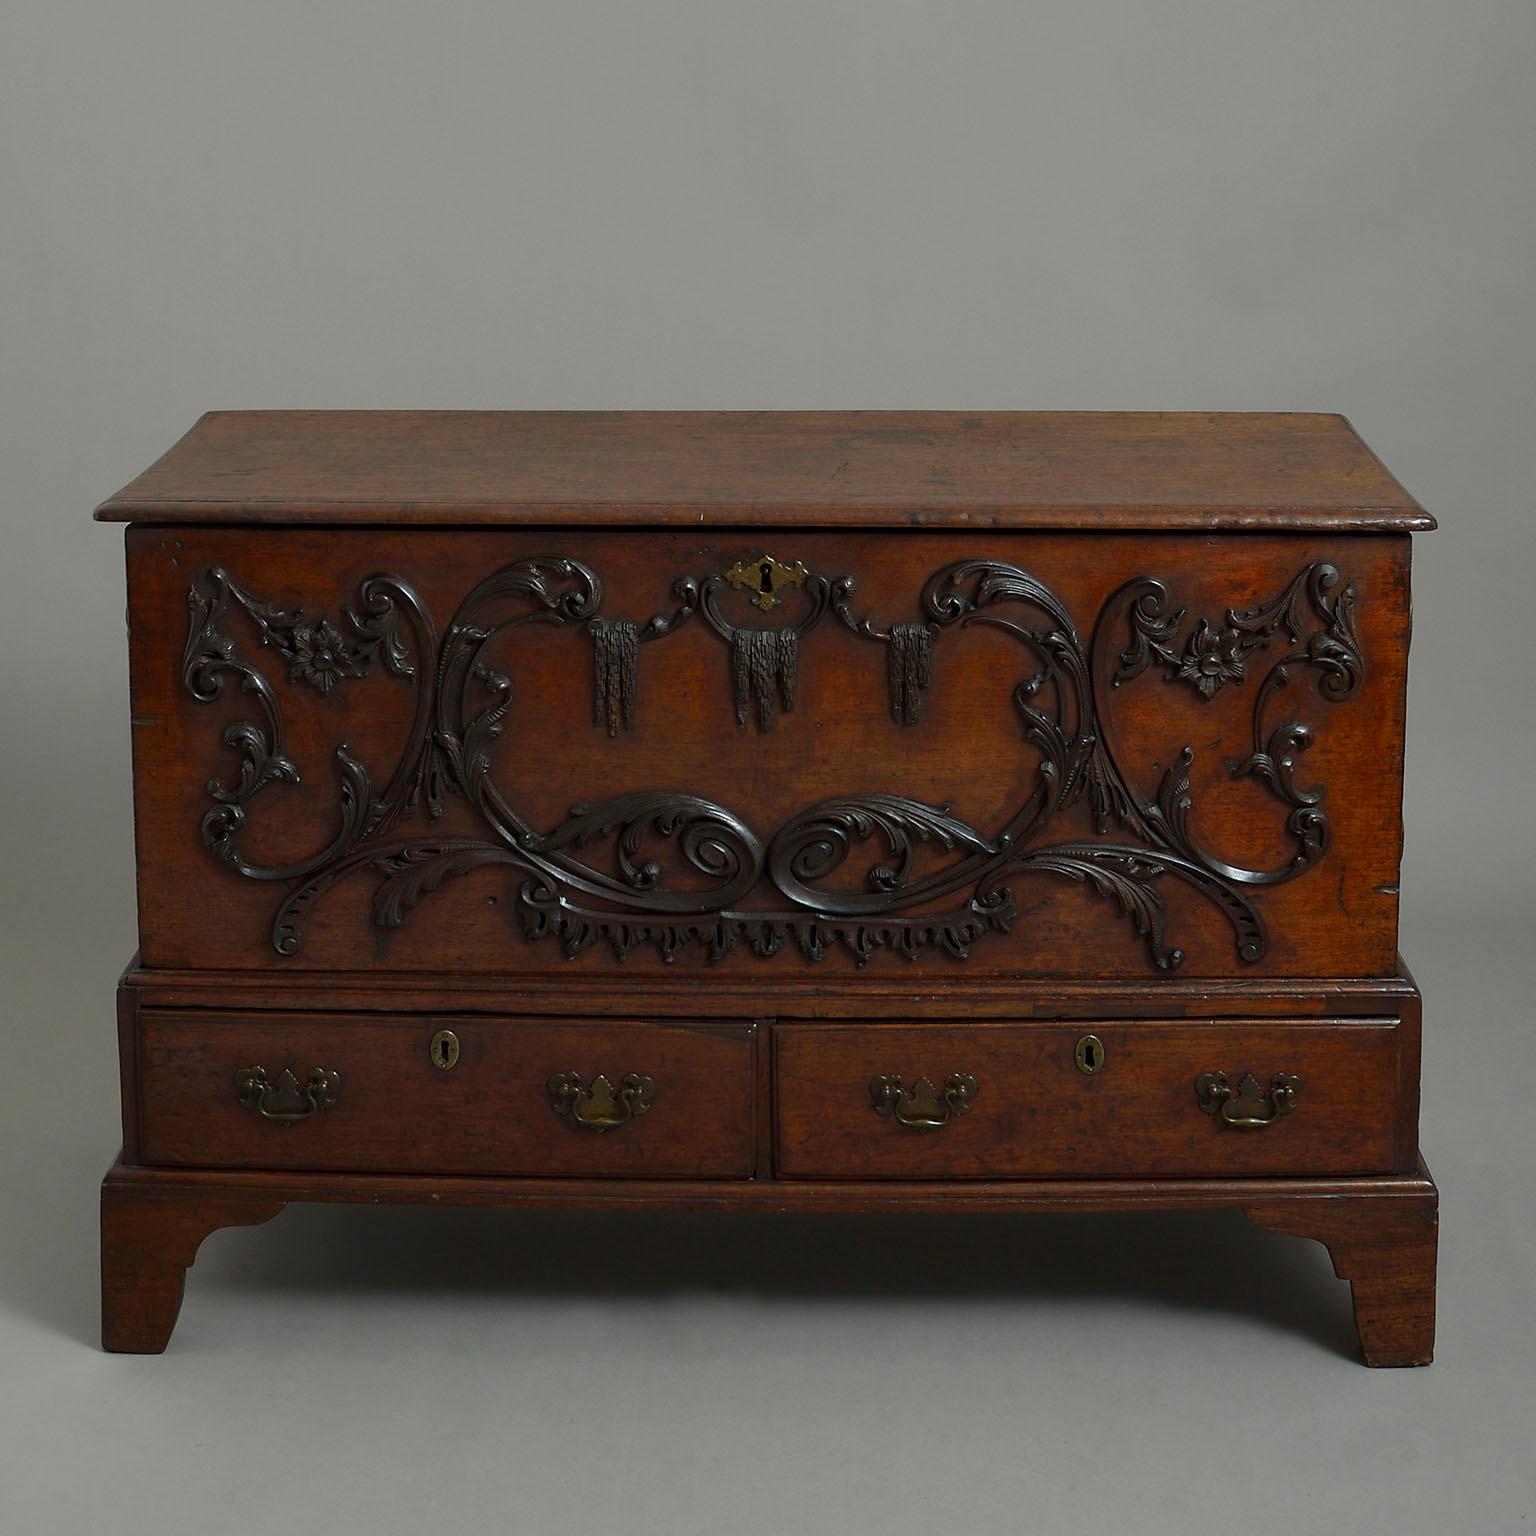 Mid-18th century mahogany mule chest in the manner of Wright & Elwick, the coffer with hinged lid standing on a separate base with two drawers over bracket feet, the front and sides applied with elaborate Rococo carving.